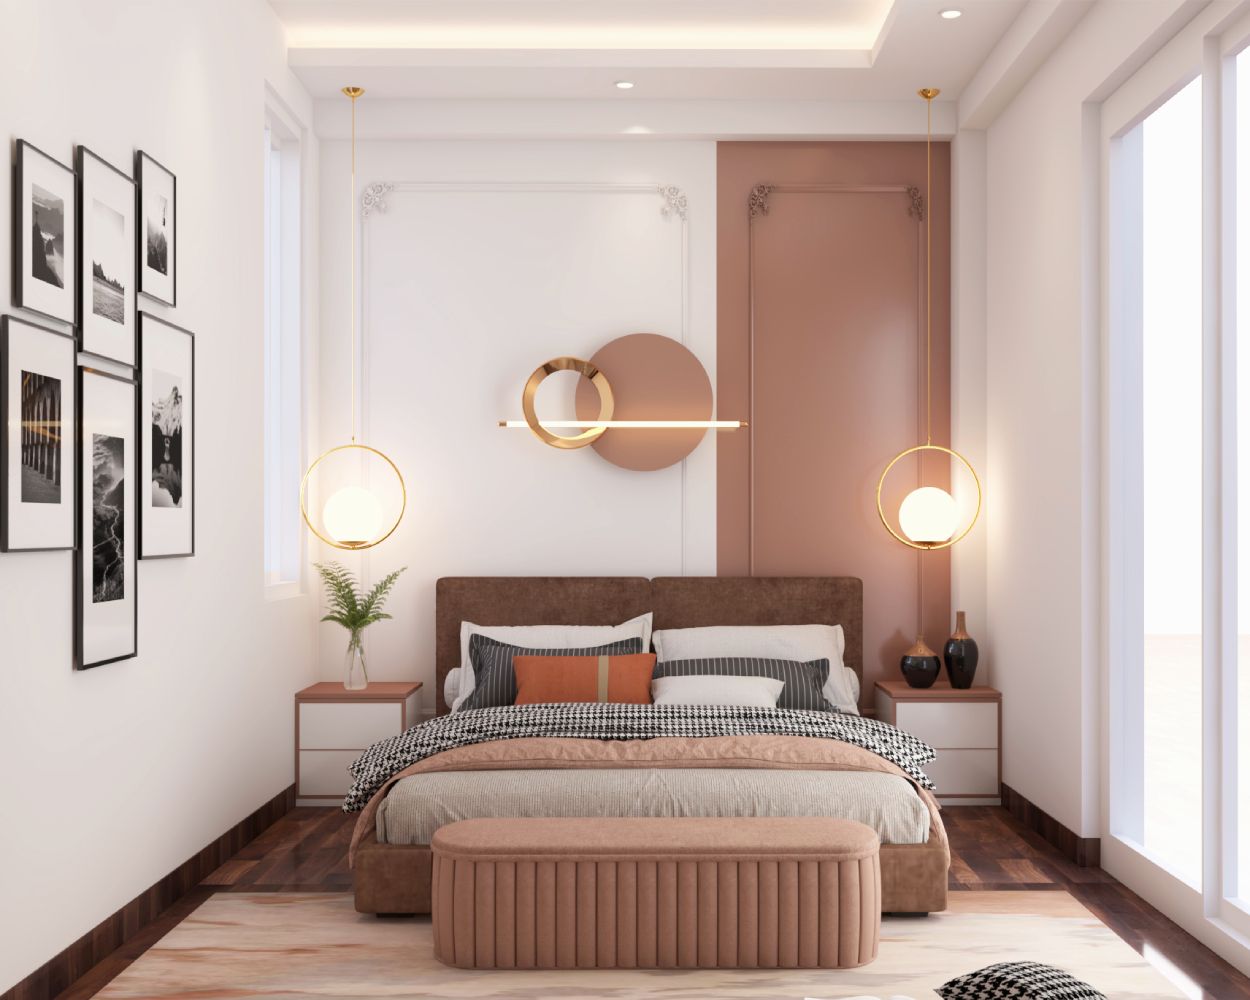 Contemporary Master Bedroom Design With Peach And White Wall Paint